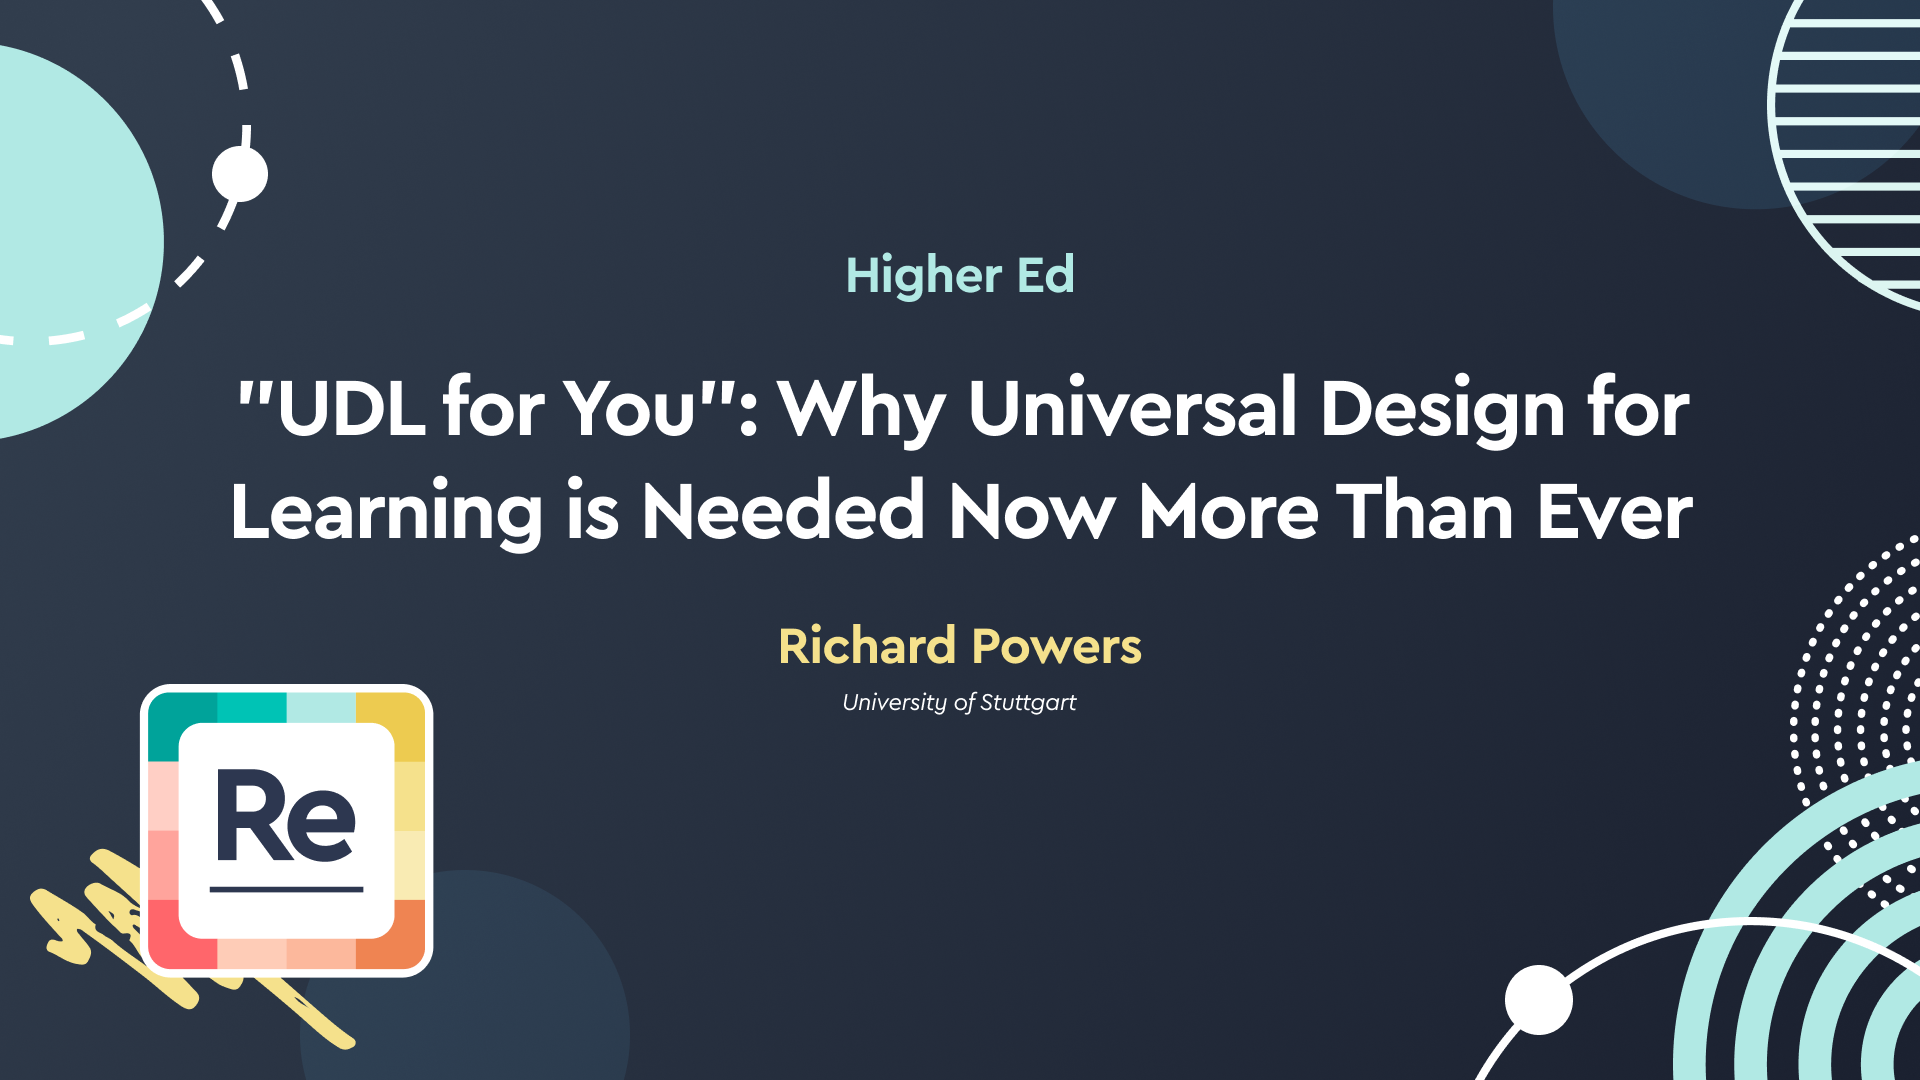 “UDL for You”: Why Universal Design for Learning is Needed Now More Than Ever